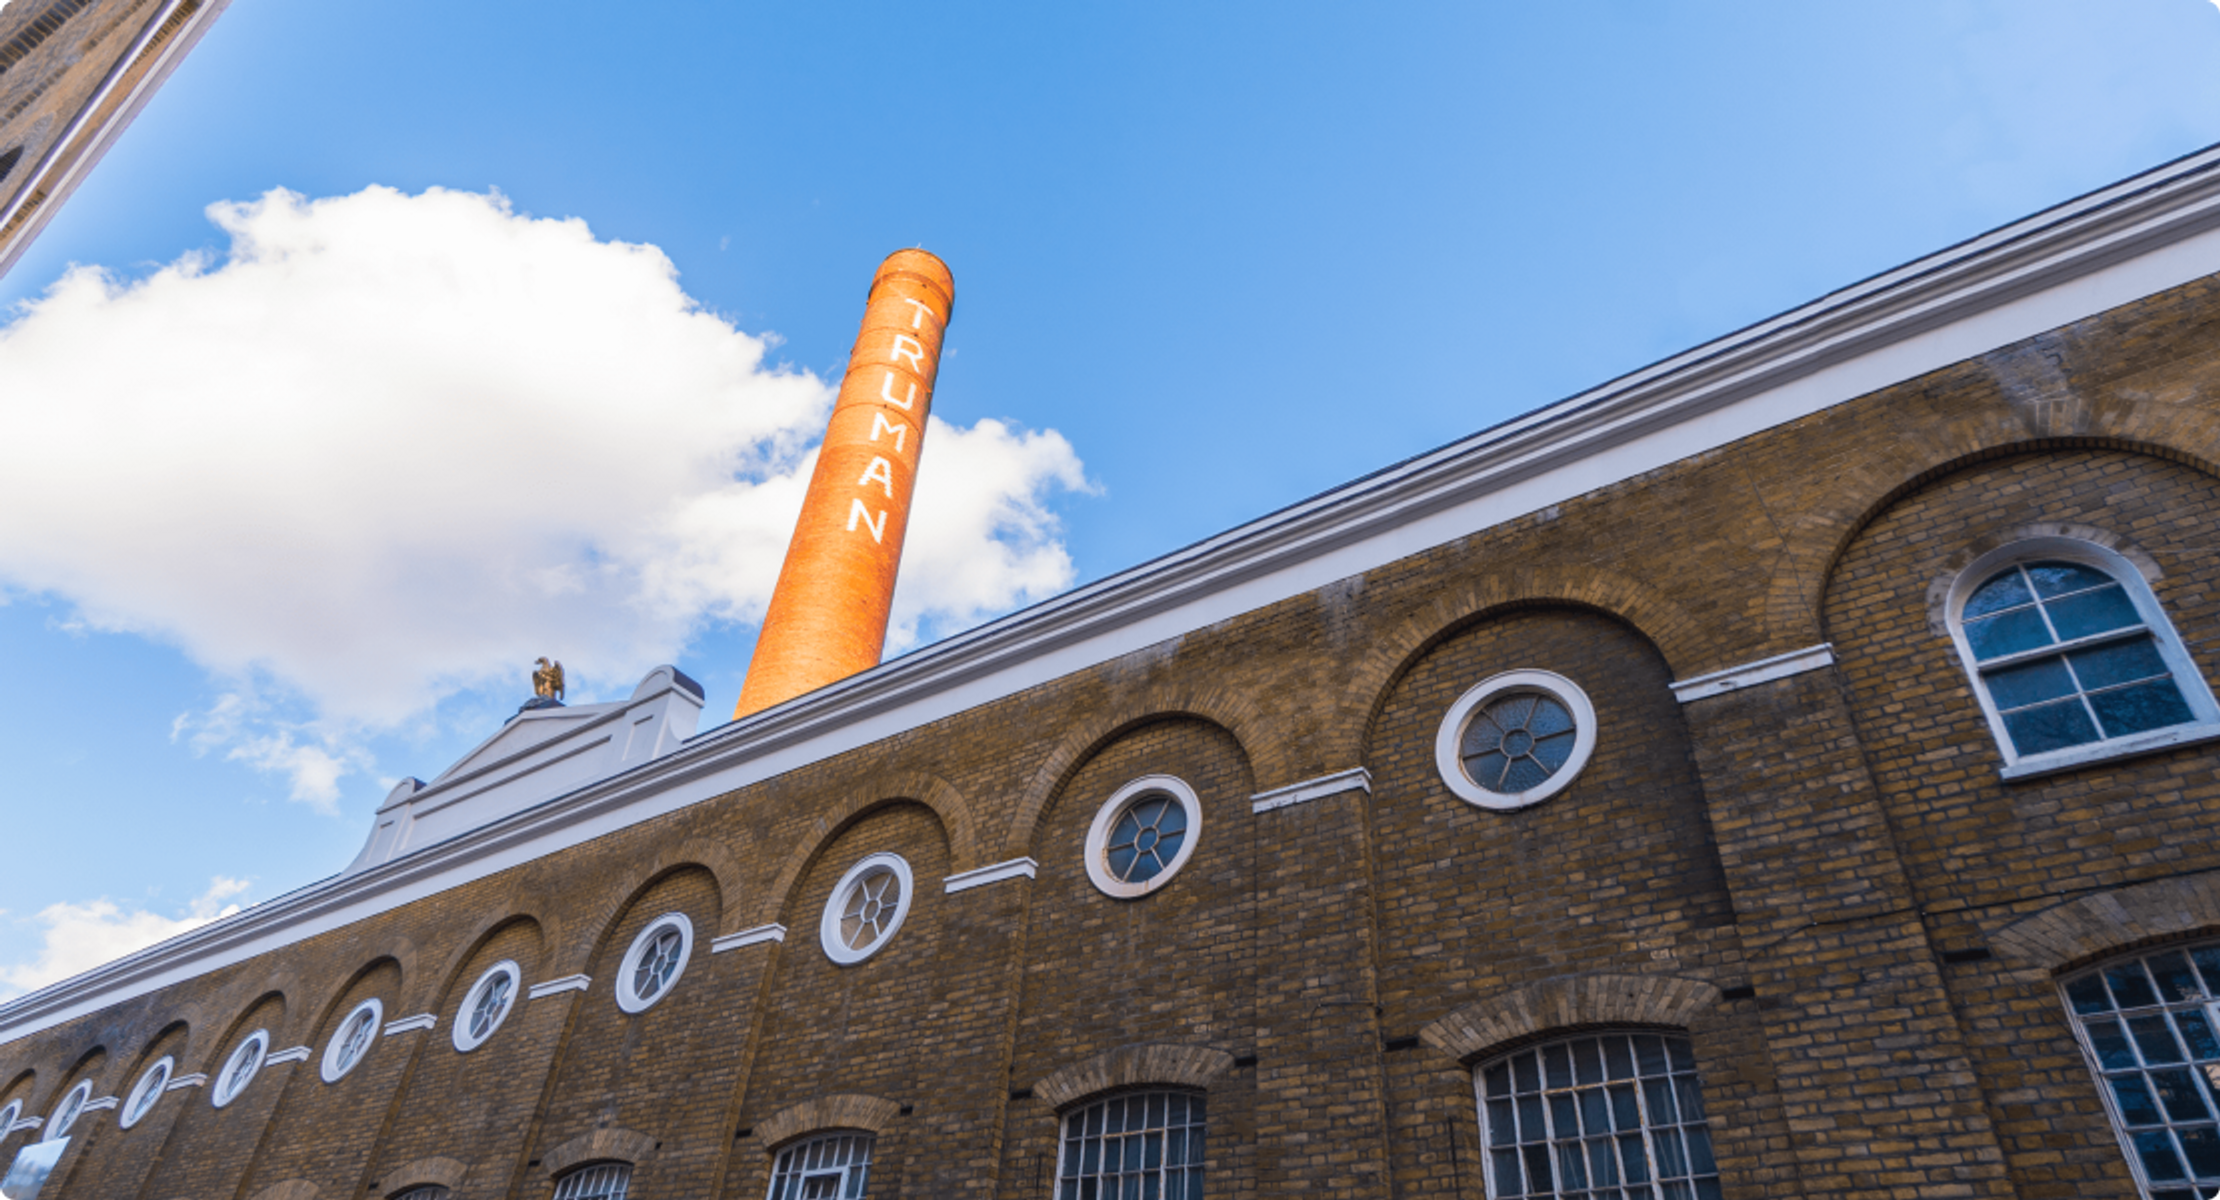 Photo of the Truman Brewery building